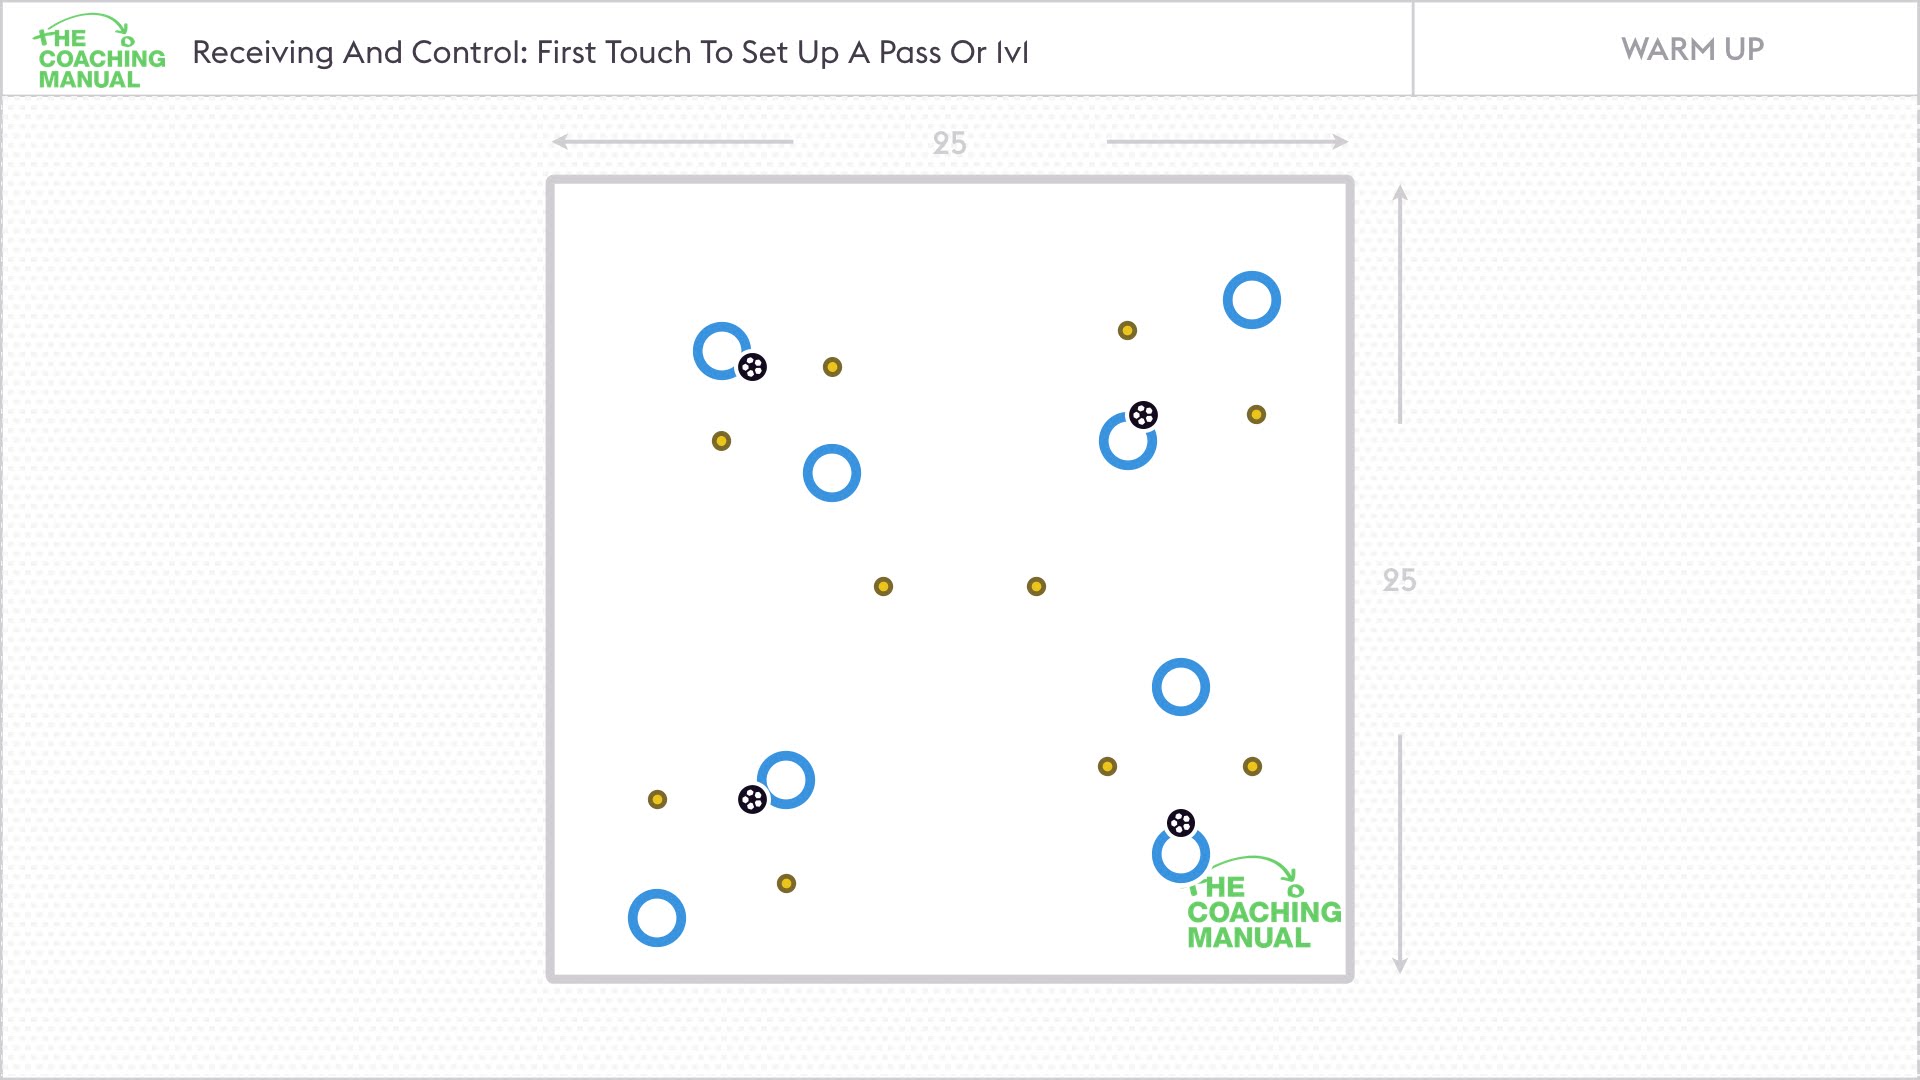 First Touch To Set Up A Pass Or 1v1 Warm Up - The Coaching Manual